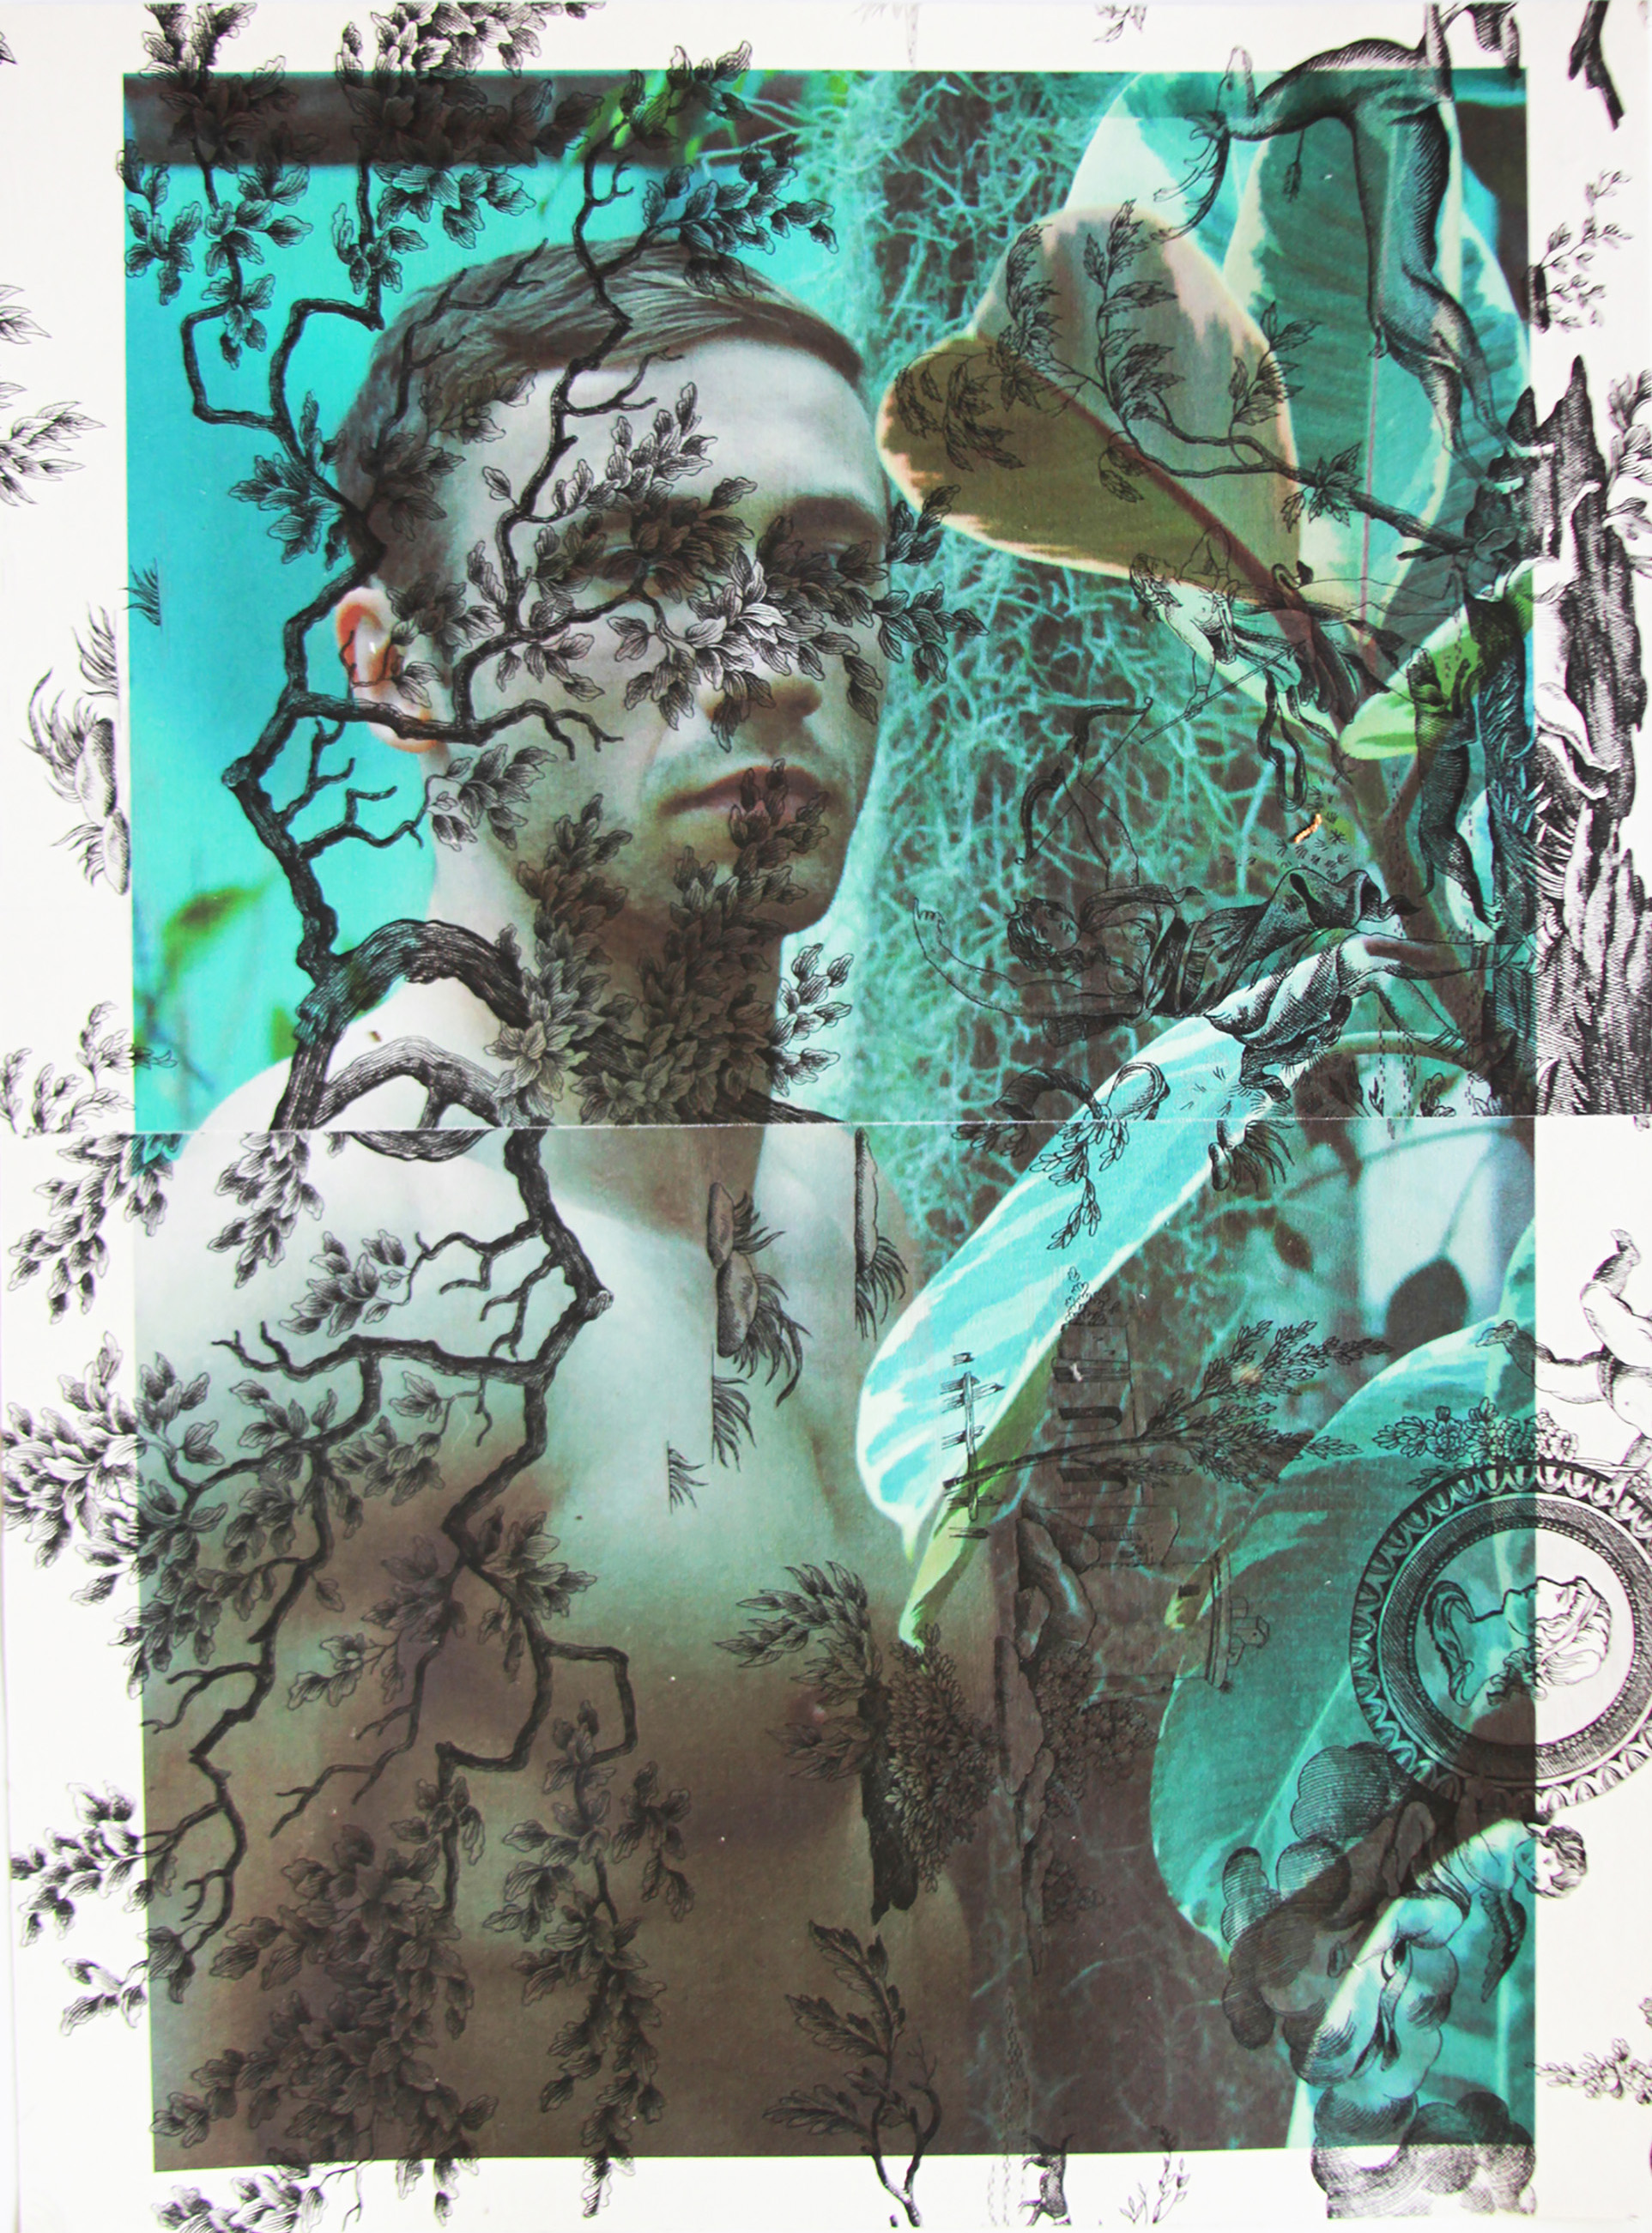 Tim Hailand, Michel in Claude Monet's greenhouse Giverny (on black mythical toile), digital pigment print on patterned toile de Jouy fabric, 25" x 19", unique print, 2012